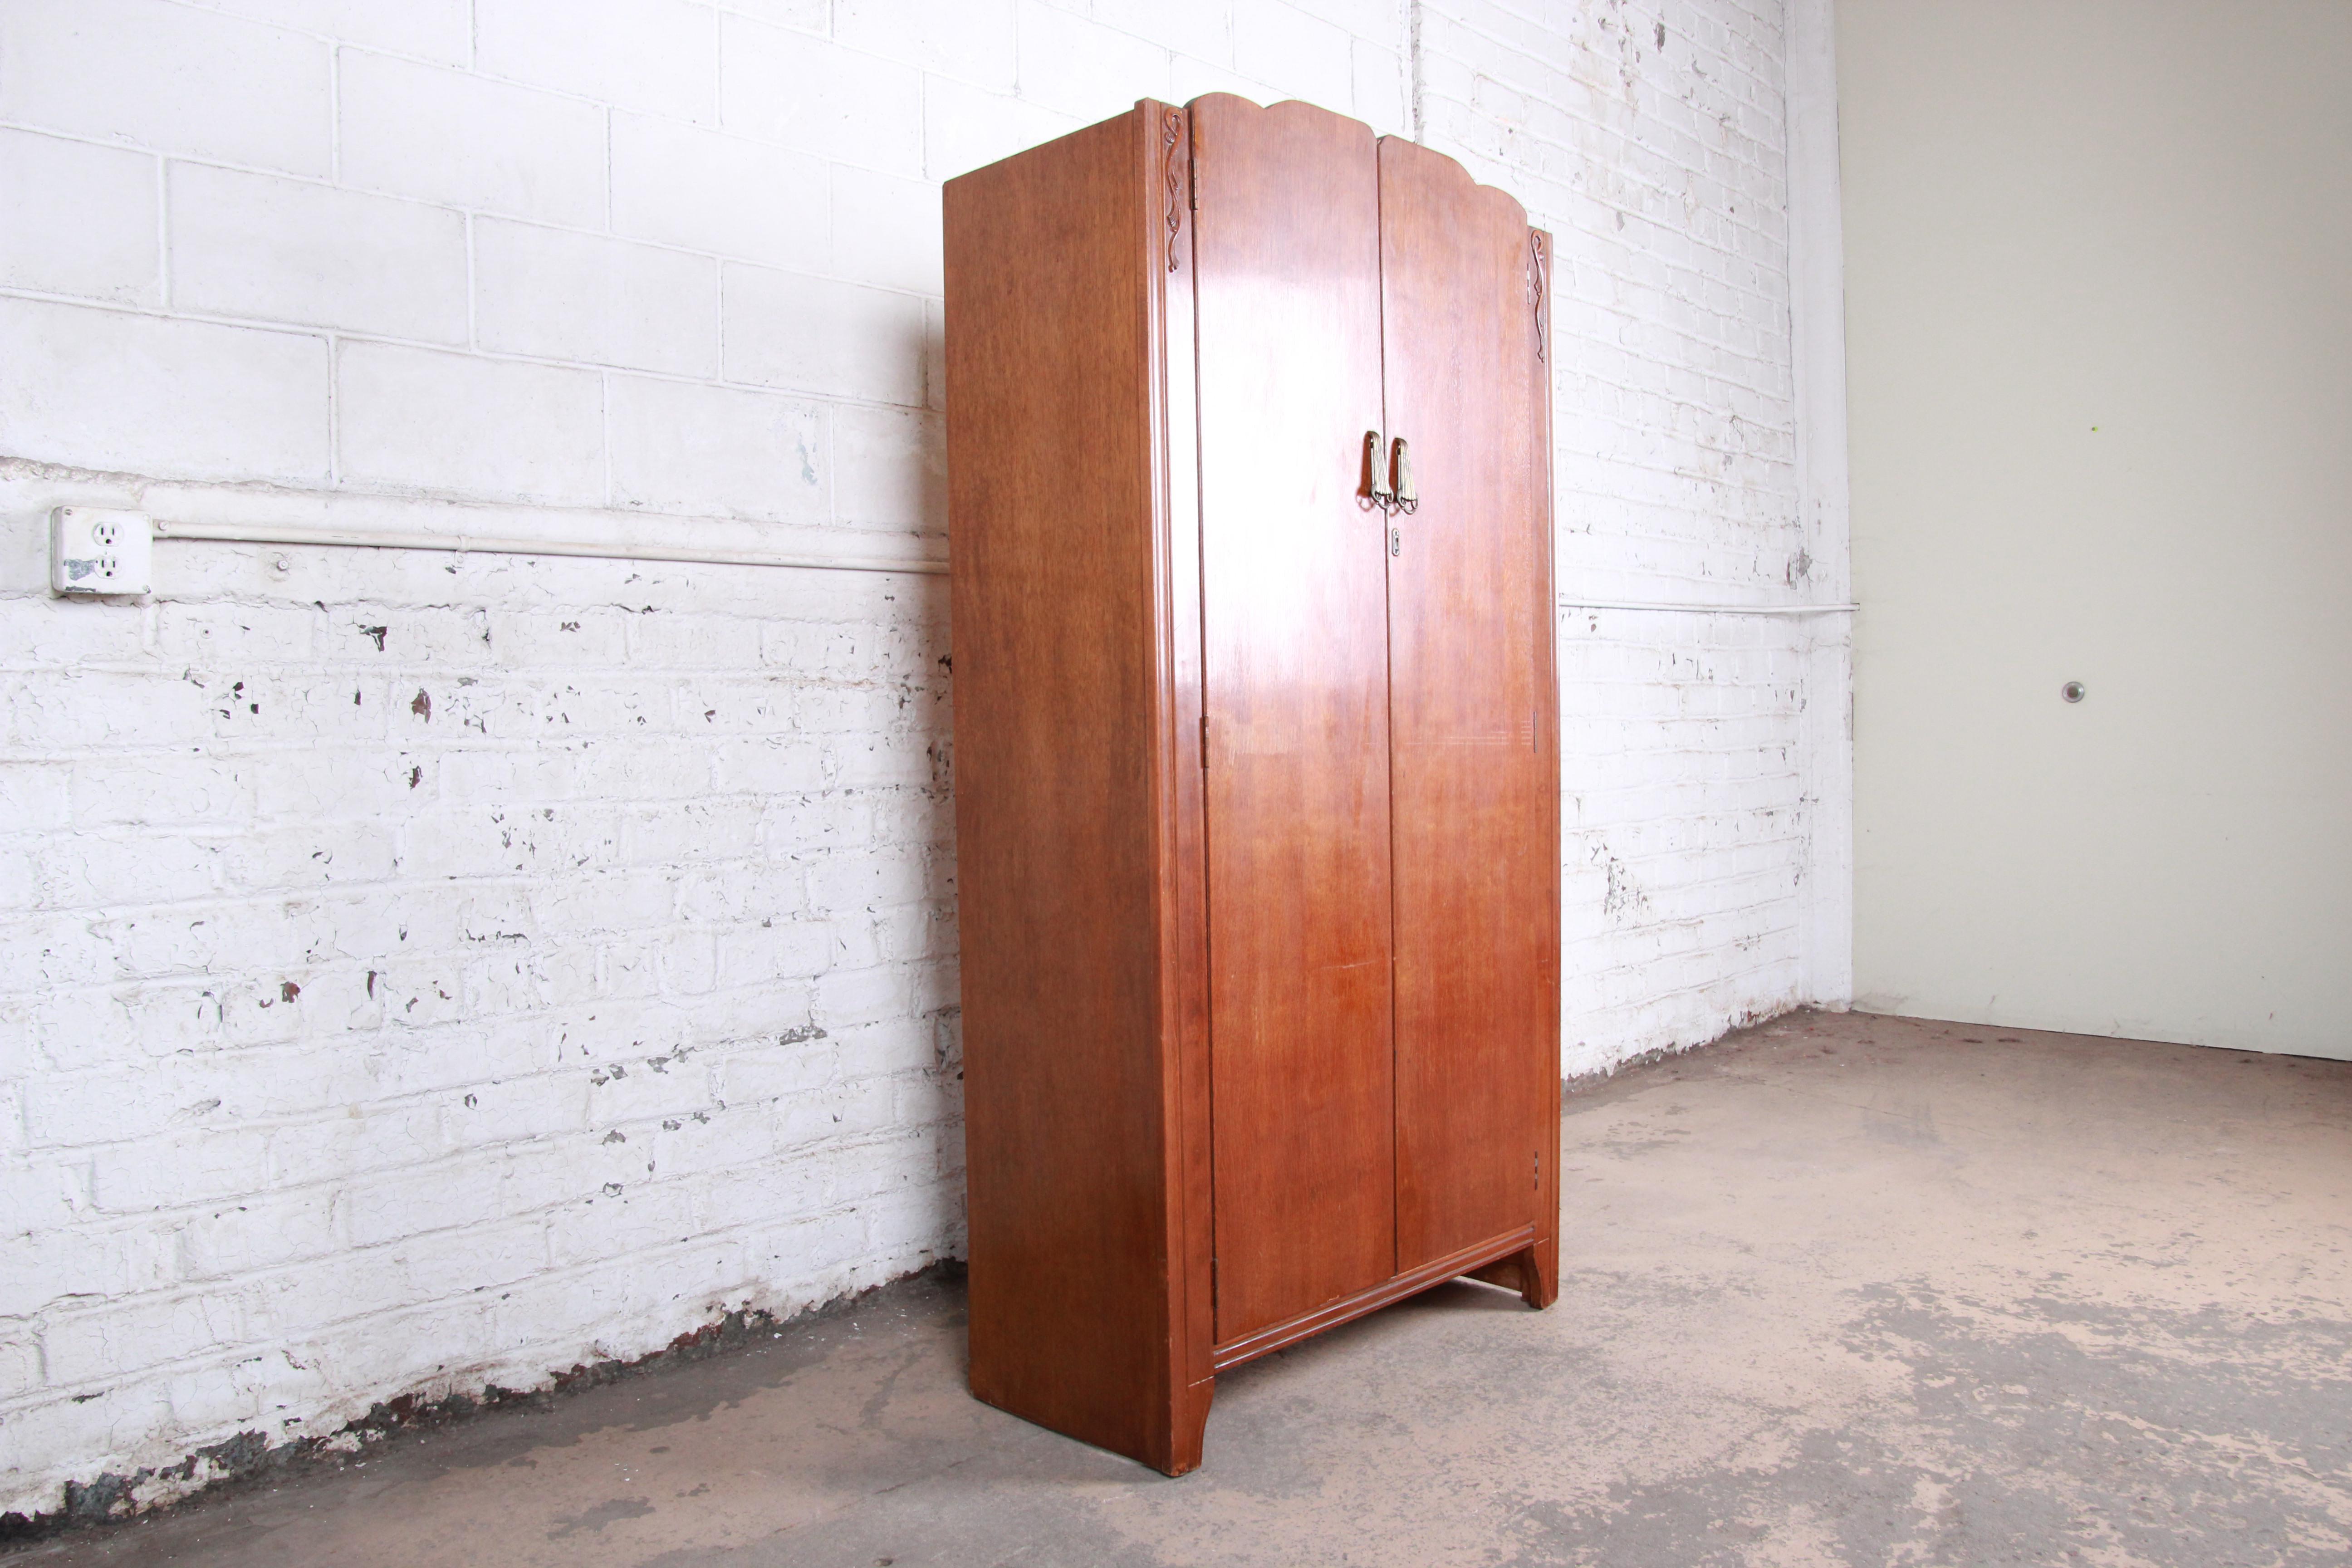 A gorgeous antique Art Deco skyscraper armoire or linen press by Lebus Furniture, circa 1930s. The wardrobe features gorgeous oak wood grain, with nice carved details and original brass hardware. Two large doors open to reveal ten cubbies with ample